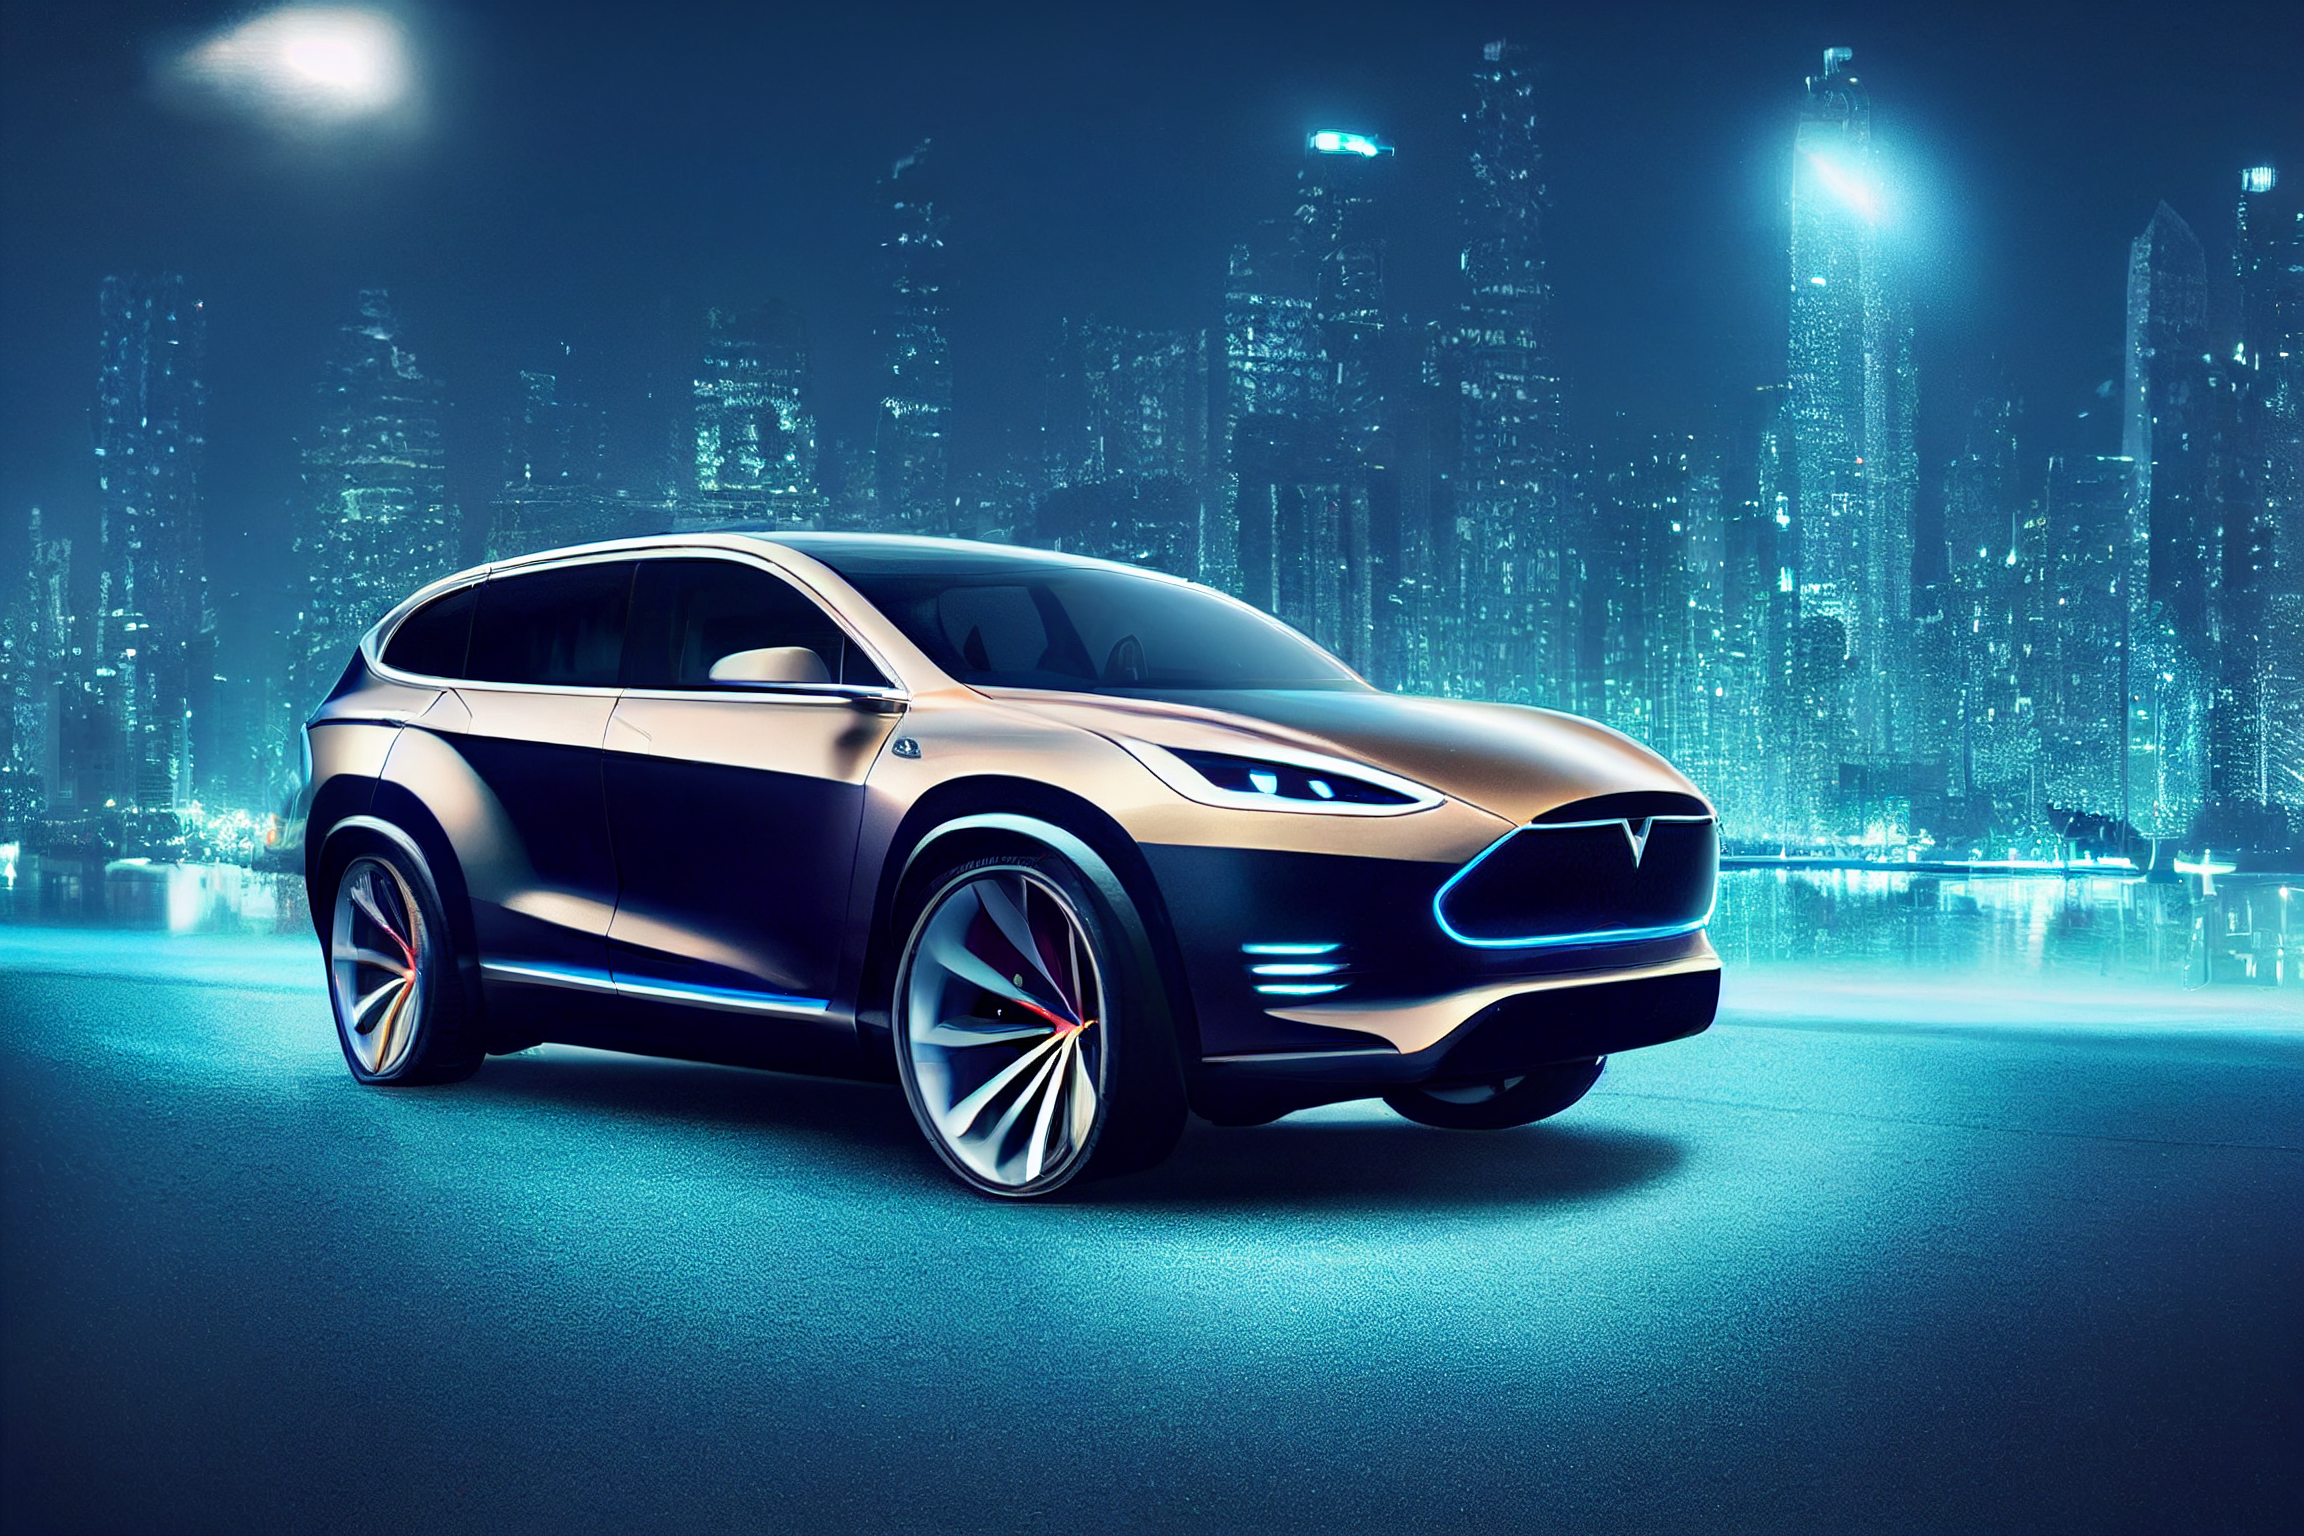 /imagine tesla combined with toyota highlander at night, in the style of tron, photorealistic, --3:2 --testp